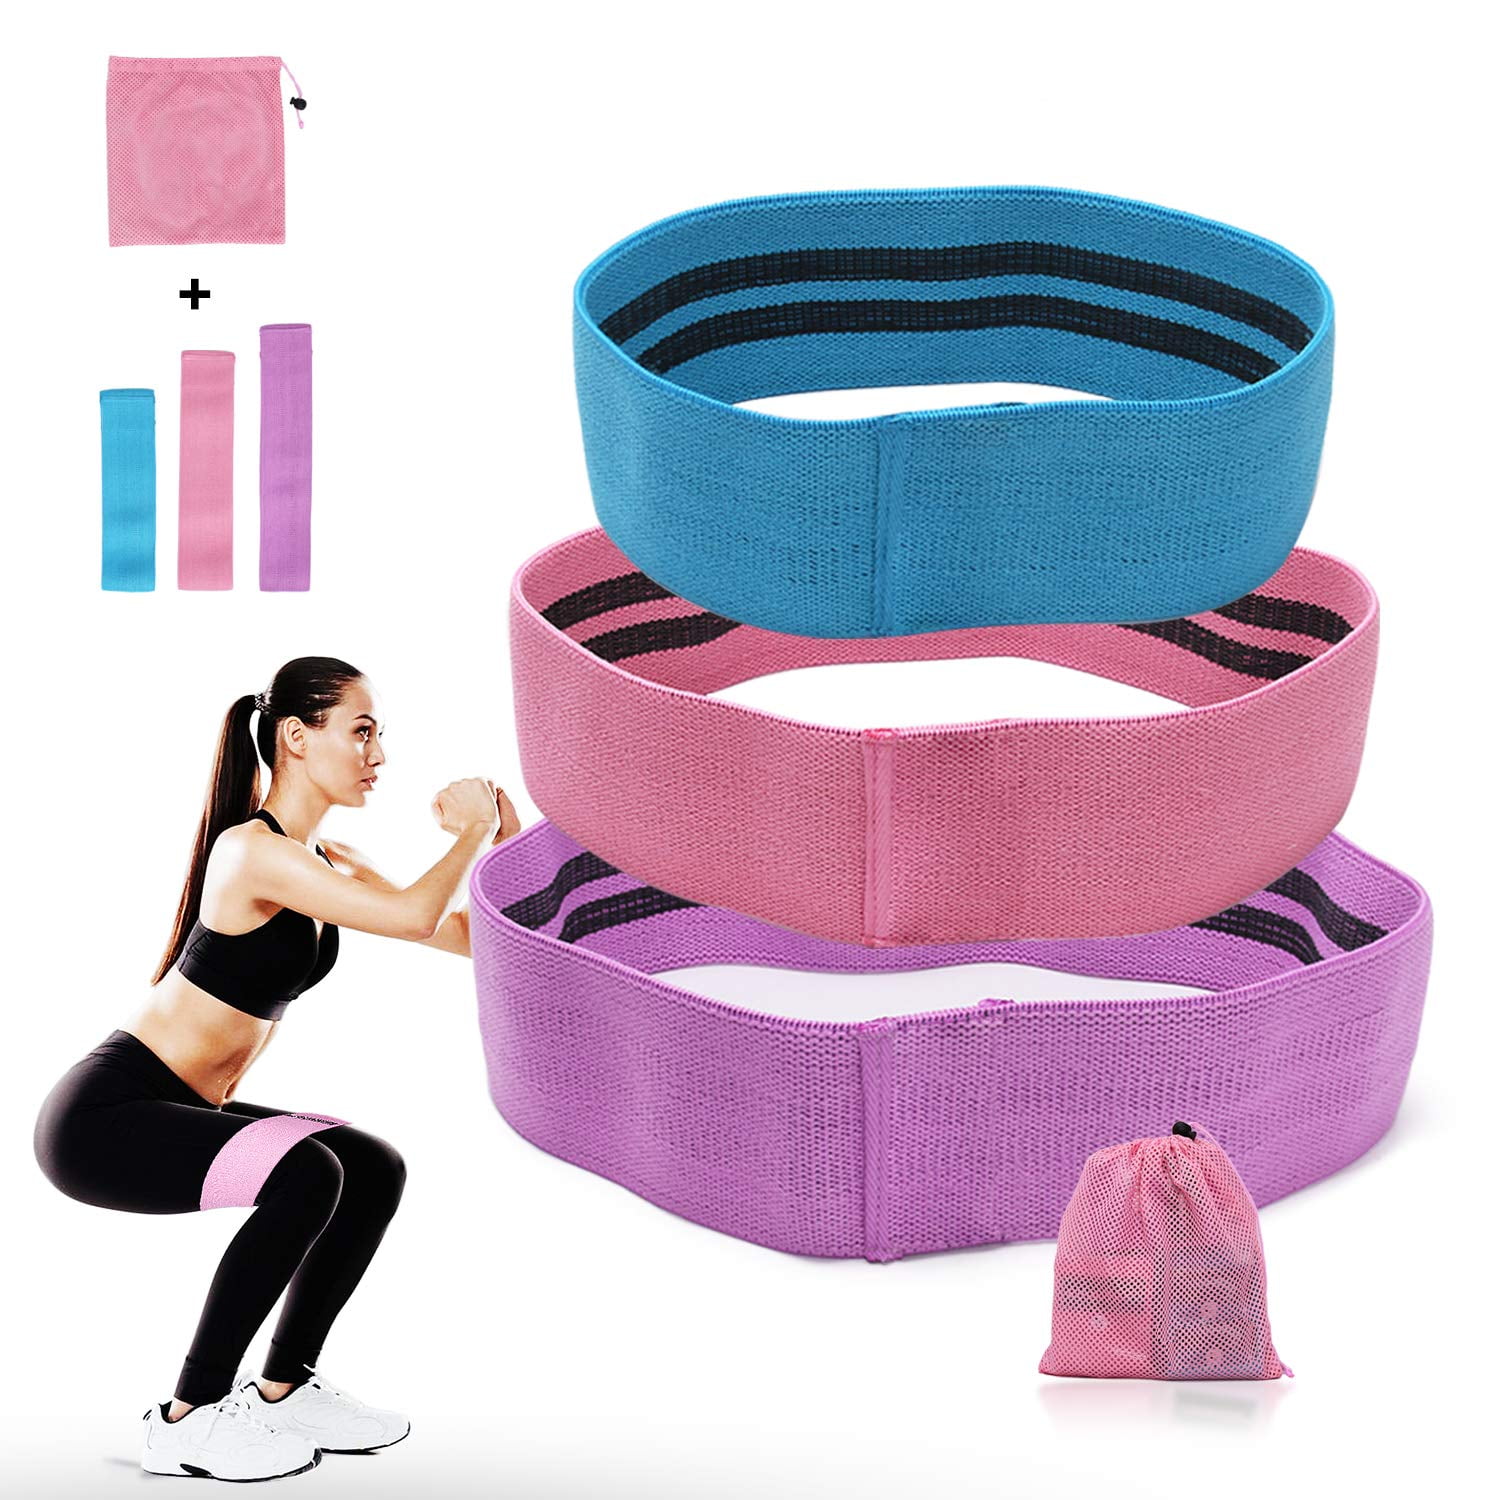 Fabric Resistance Bands Set 3pcs - Exercise bands booty bands USA SELLER 